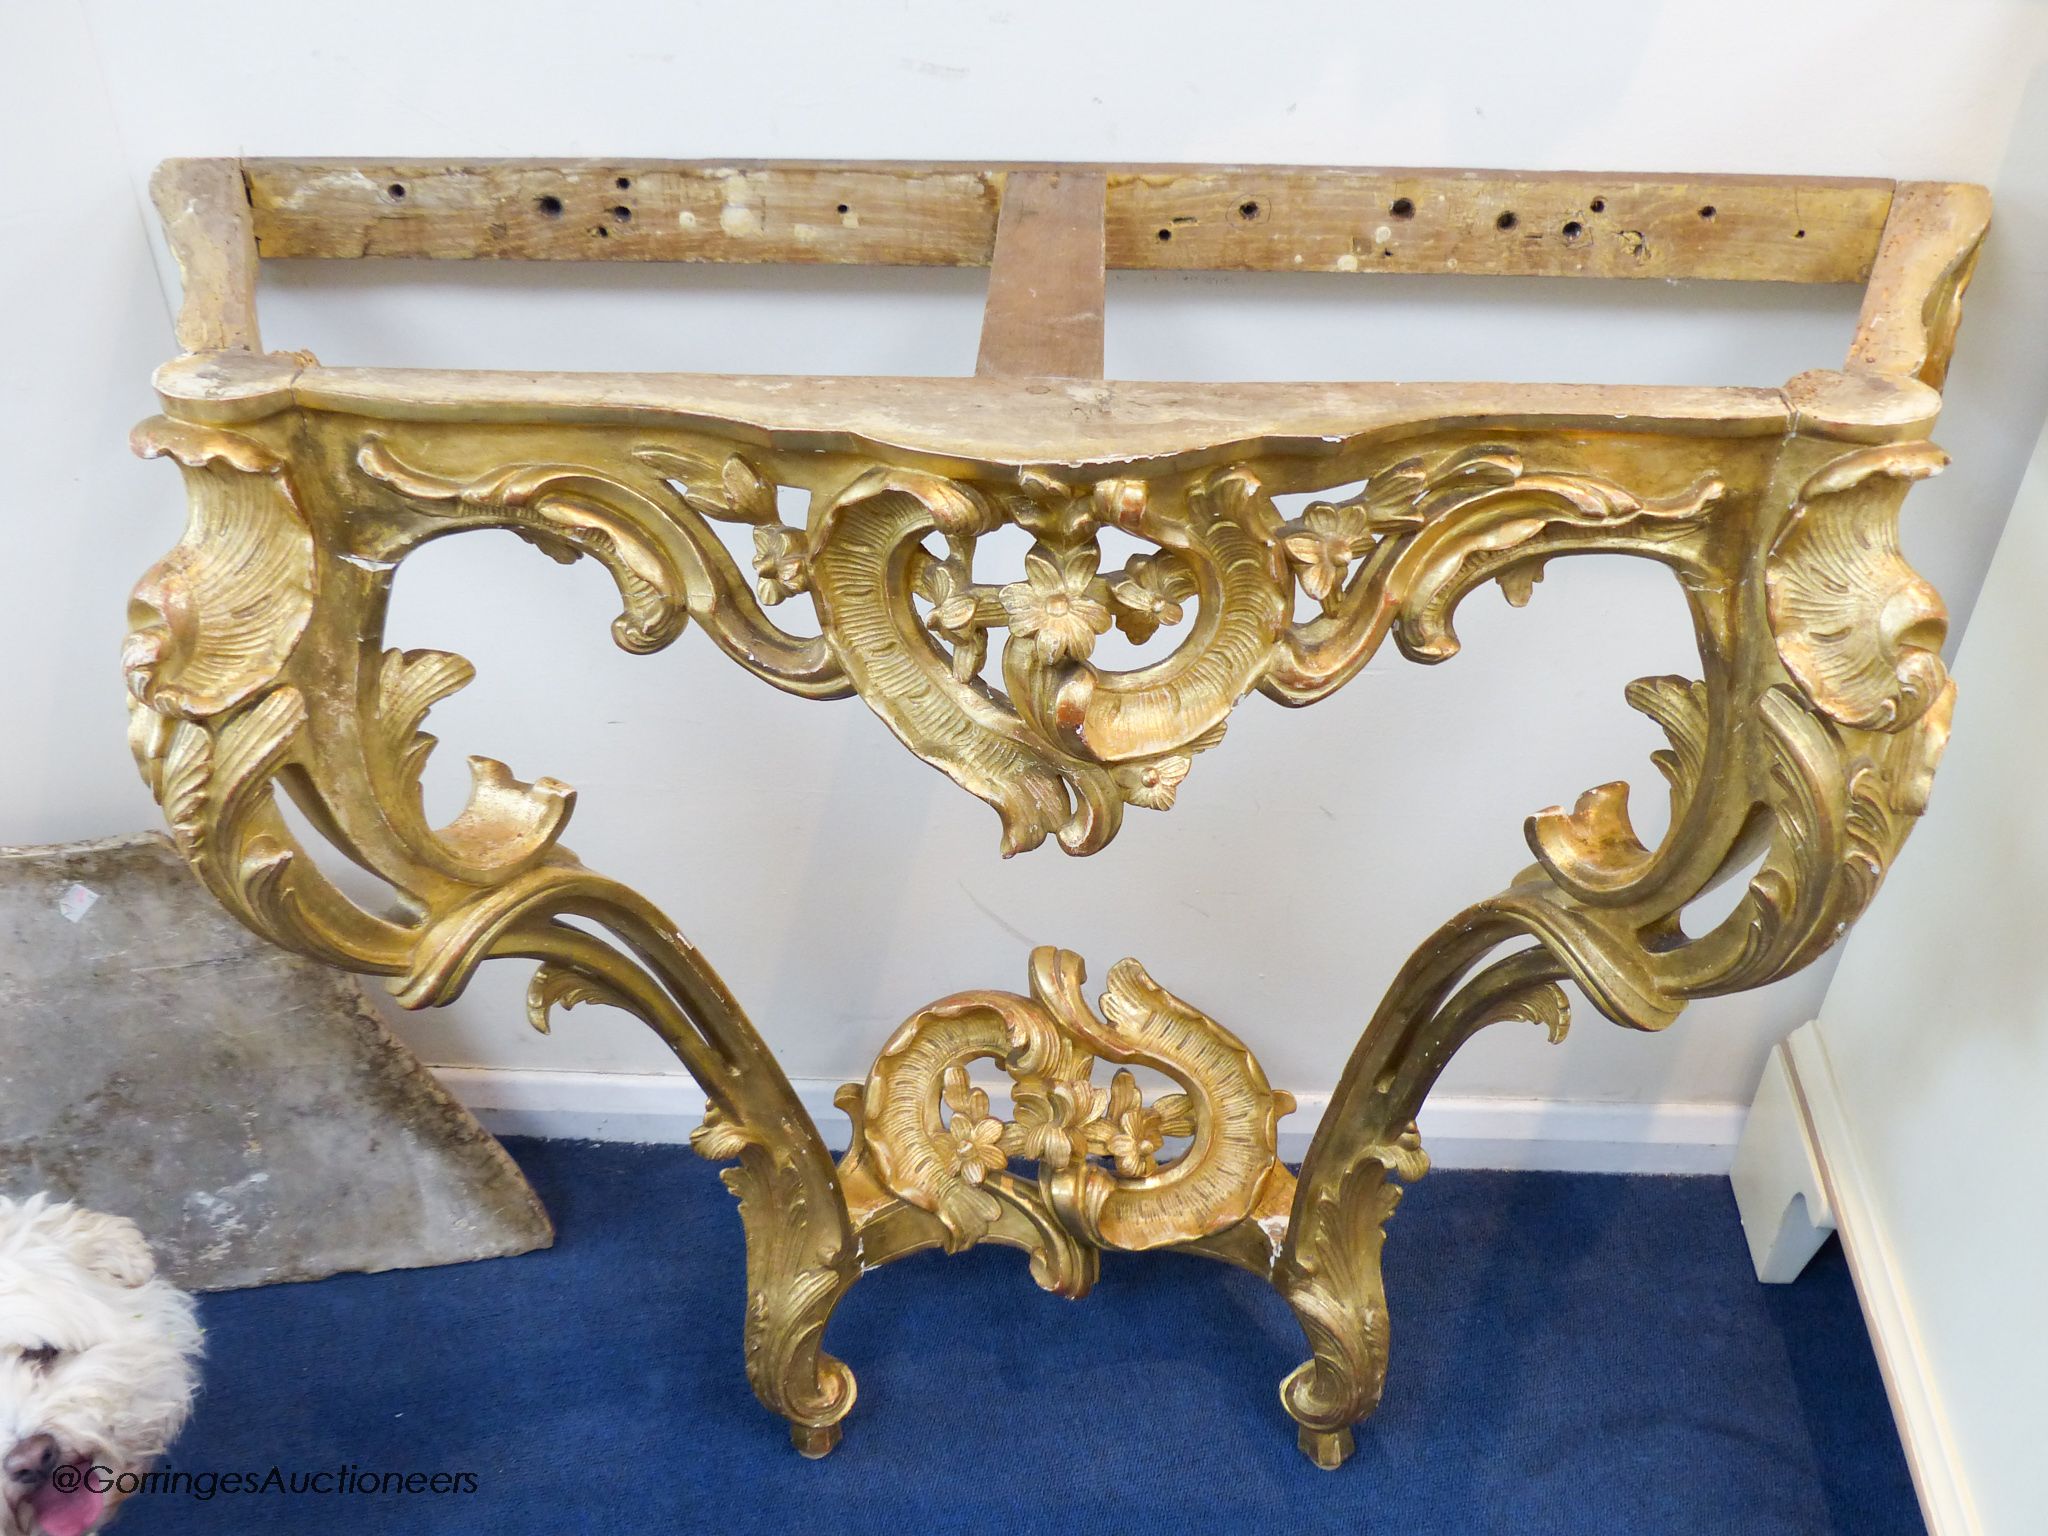 A 19th century rococo revival giltwood console table, 95cm wide, 86.5cm high and a similar later giltwood mirror, 113cm high, 64.5cm wide